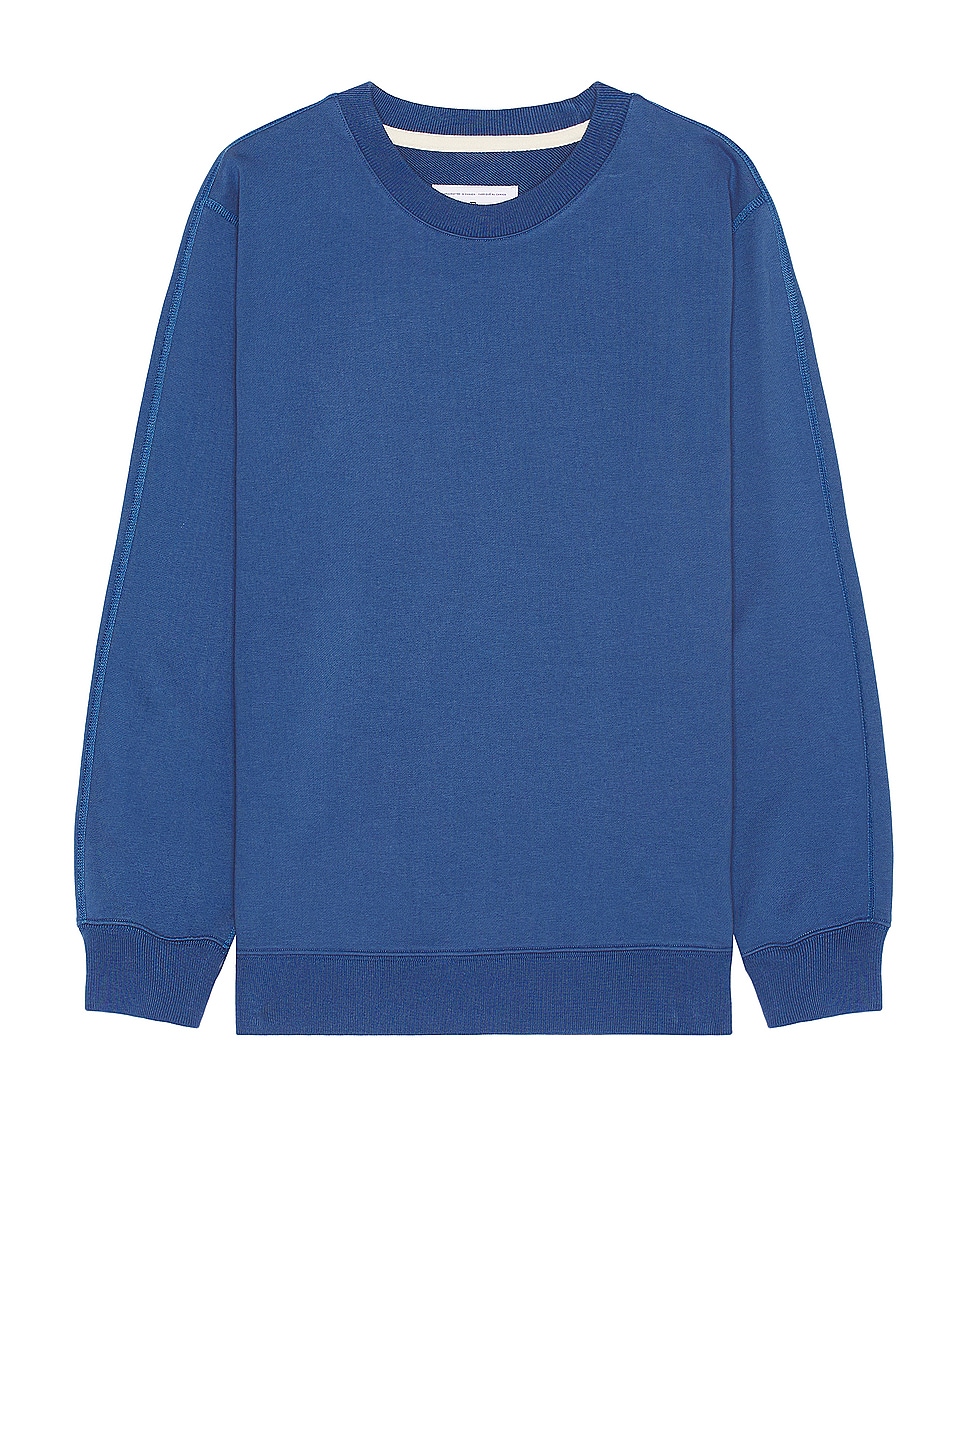 Image 1 of Reigning Champ Midweight Terry Classic Crewneck in Lapis